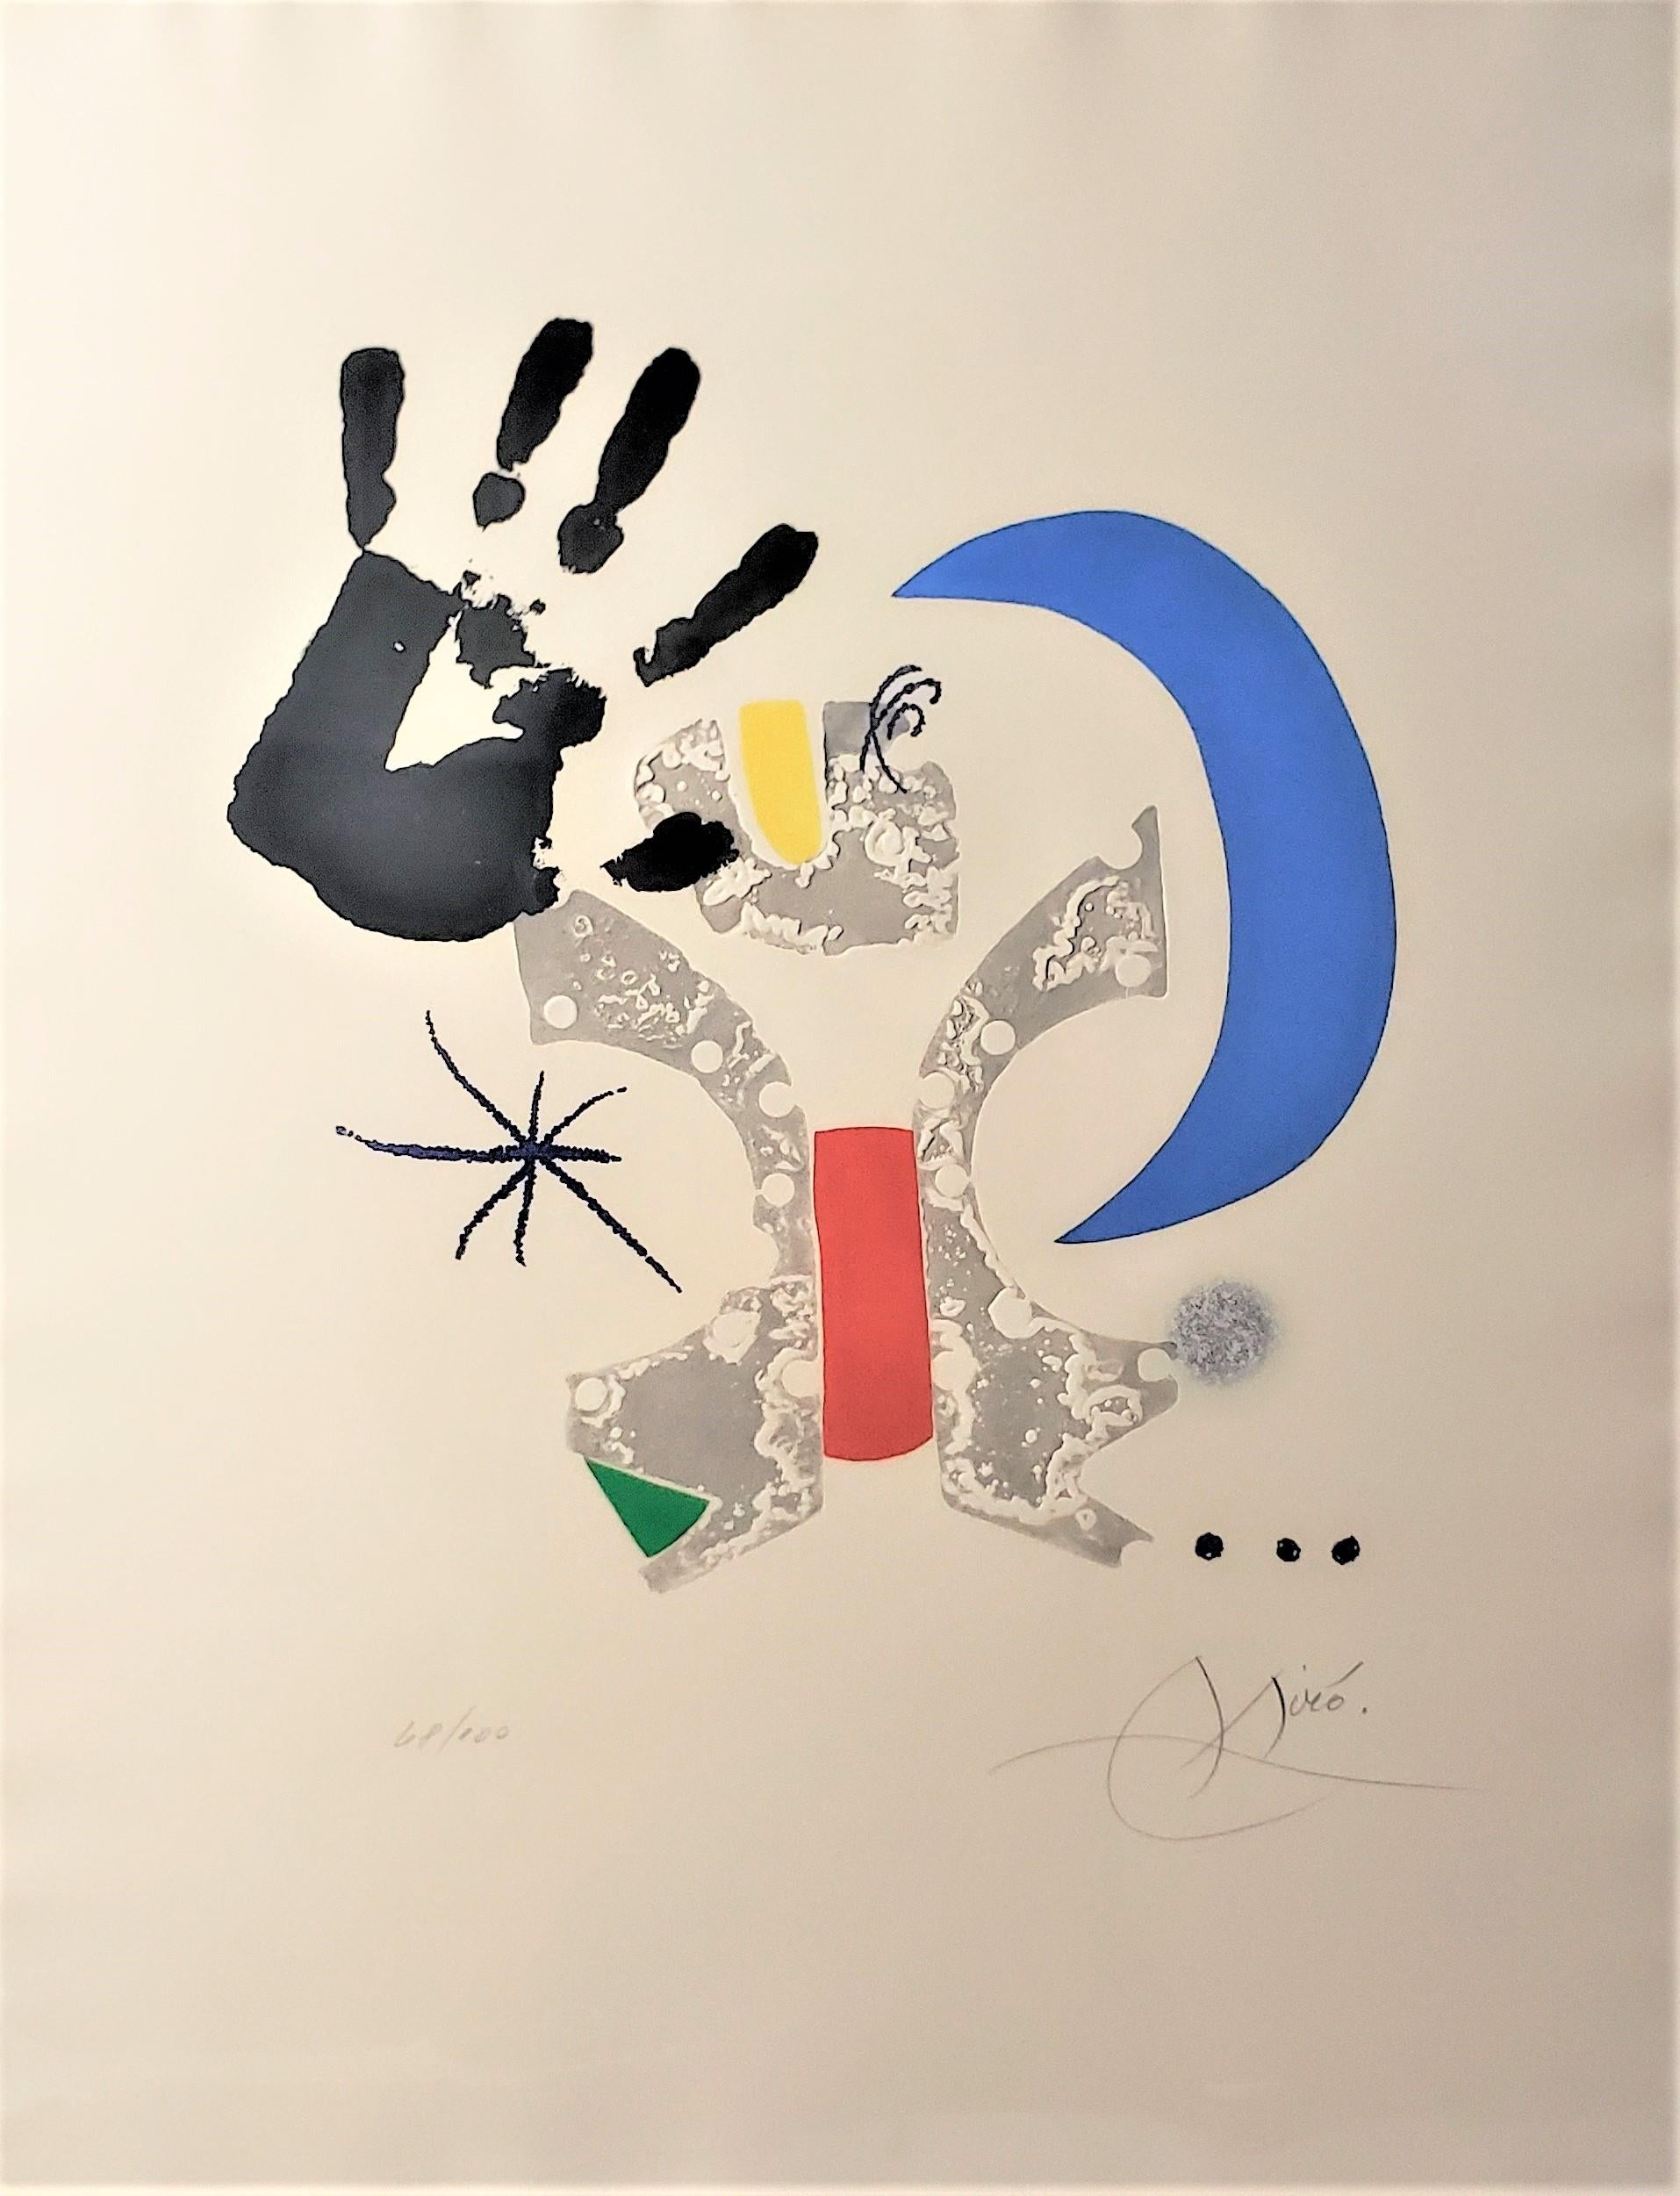 This signed and numbered lithograph was done by the renowned Joan Miro of Spain, and dates to 1976 and done in his Abstract Modernist style. This large lithograph is titled 